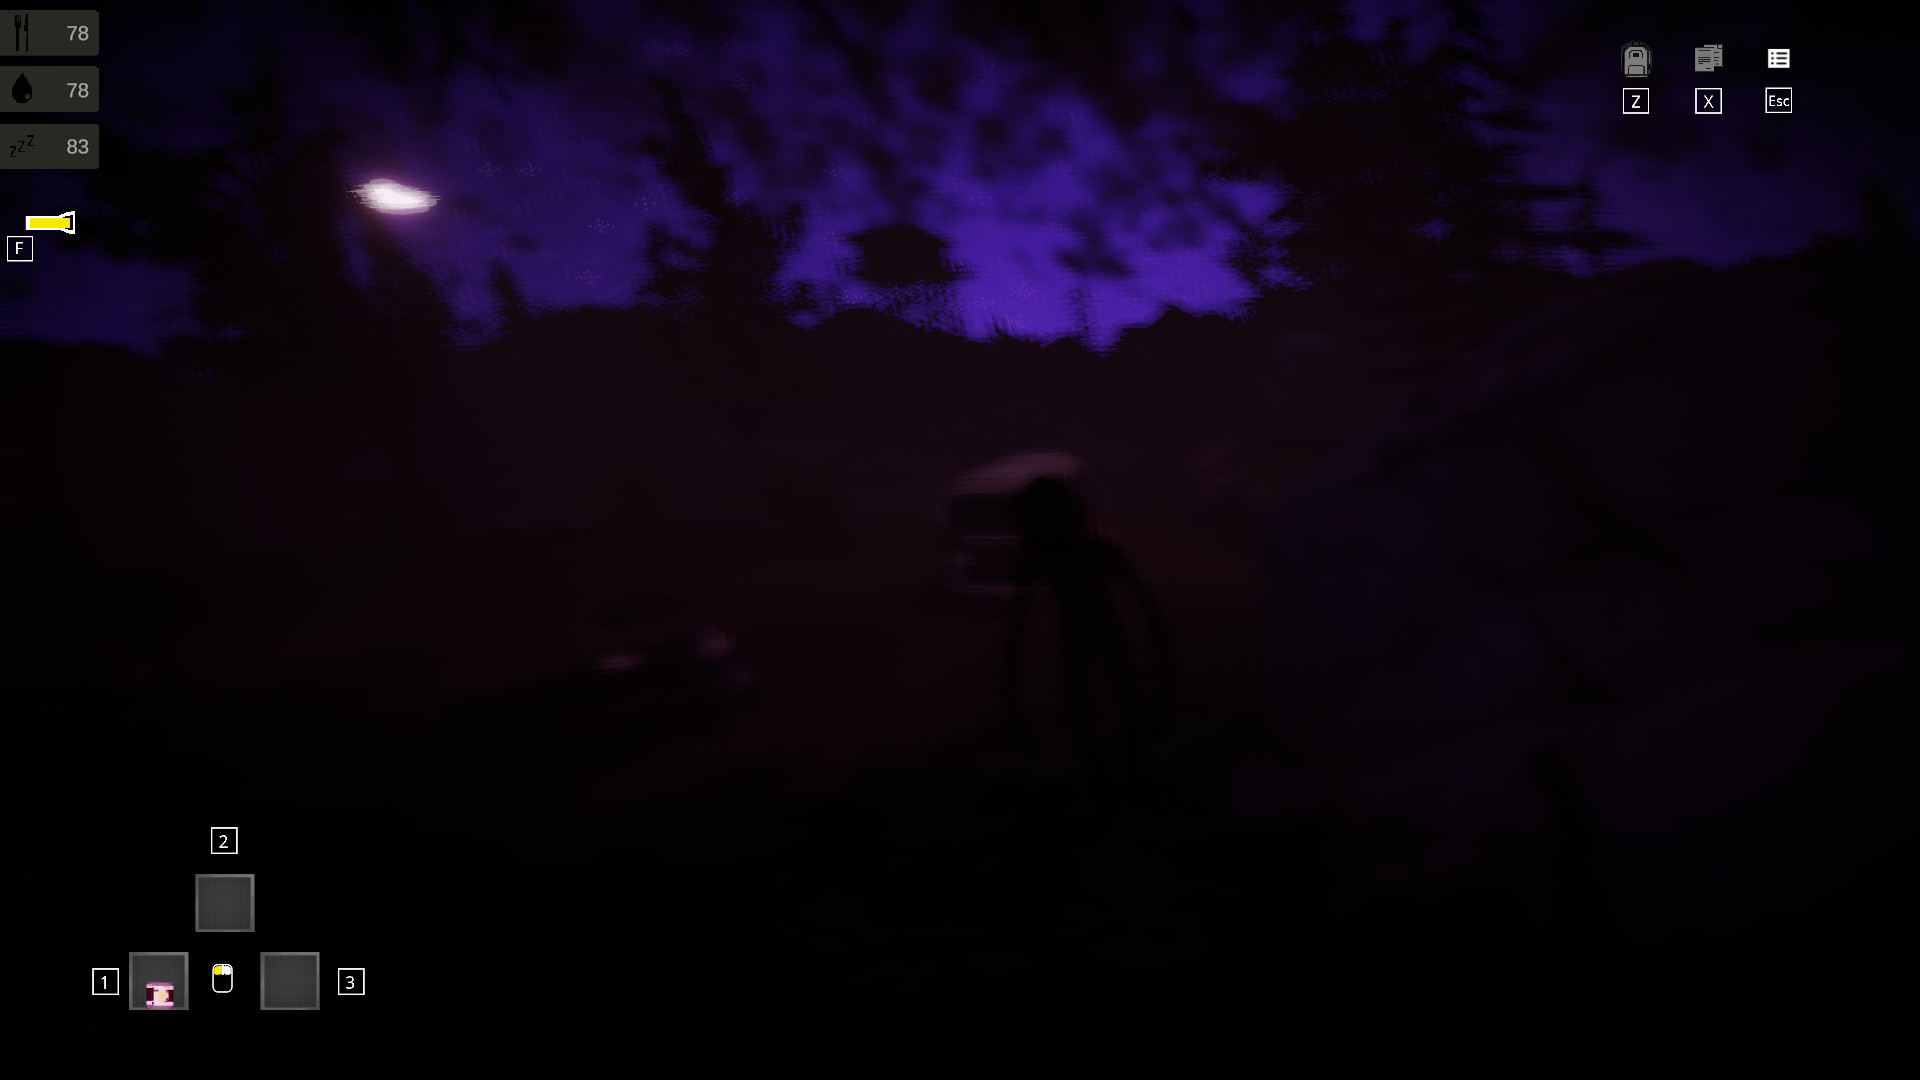 Abducted: The Night Hunters Free Download